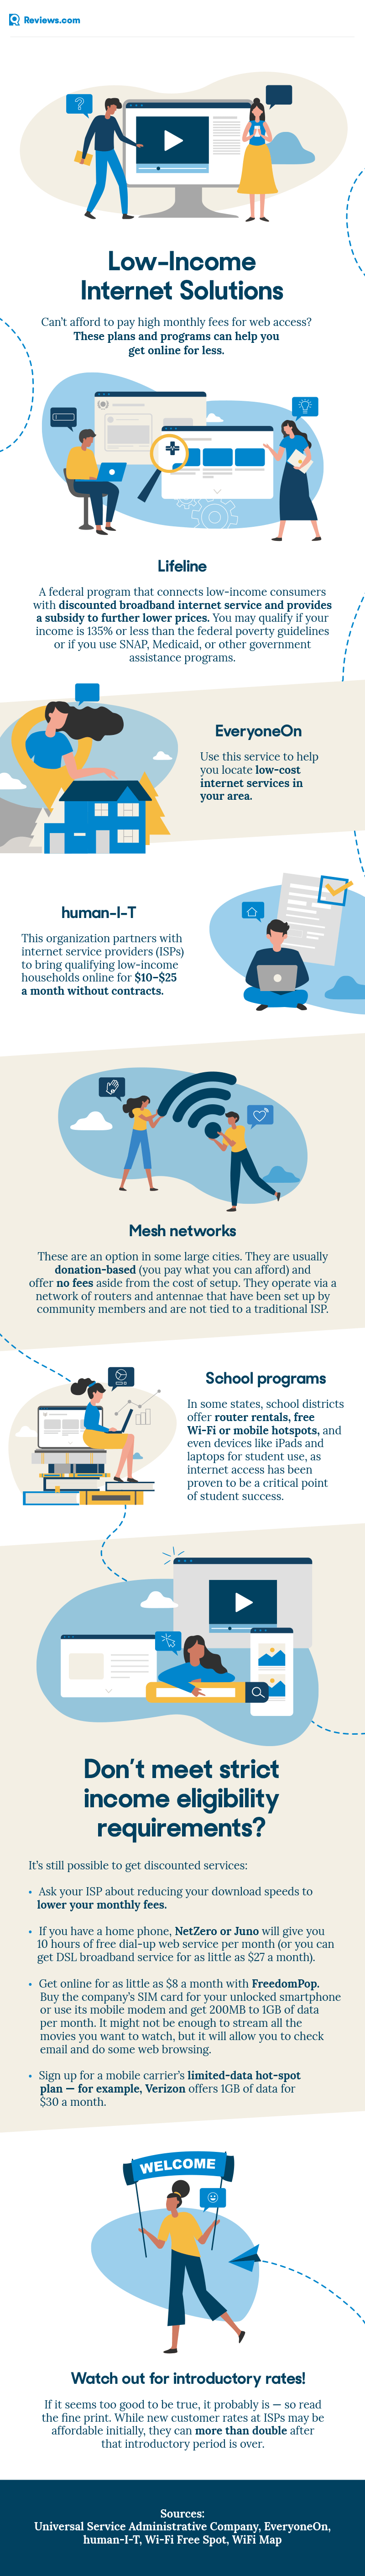 Internet Options for Students on Low Income